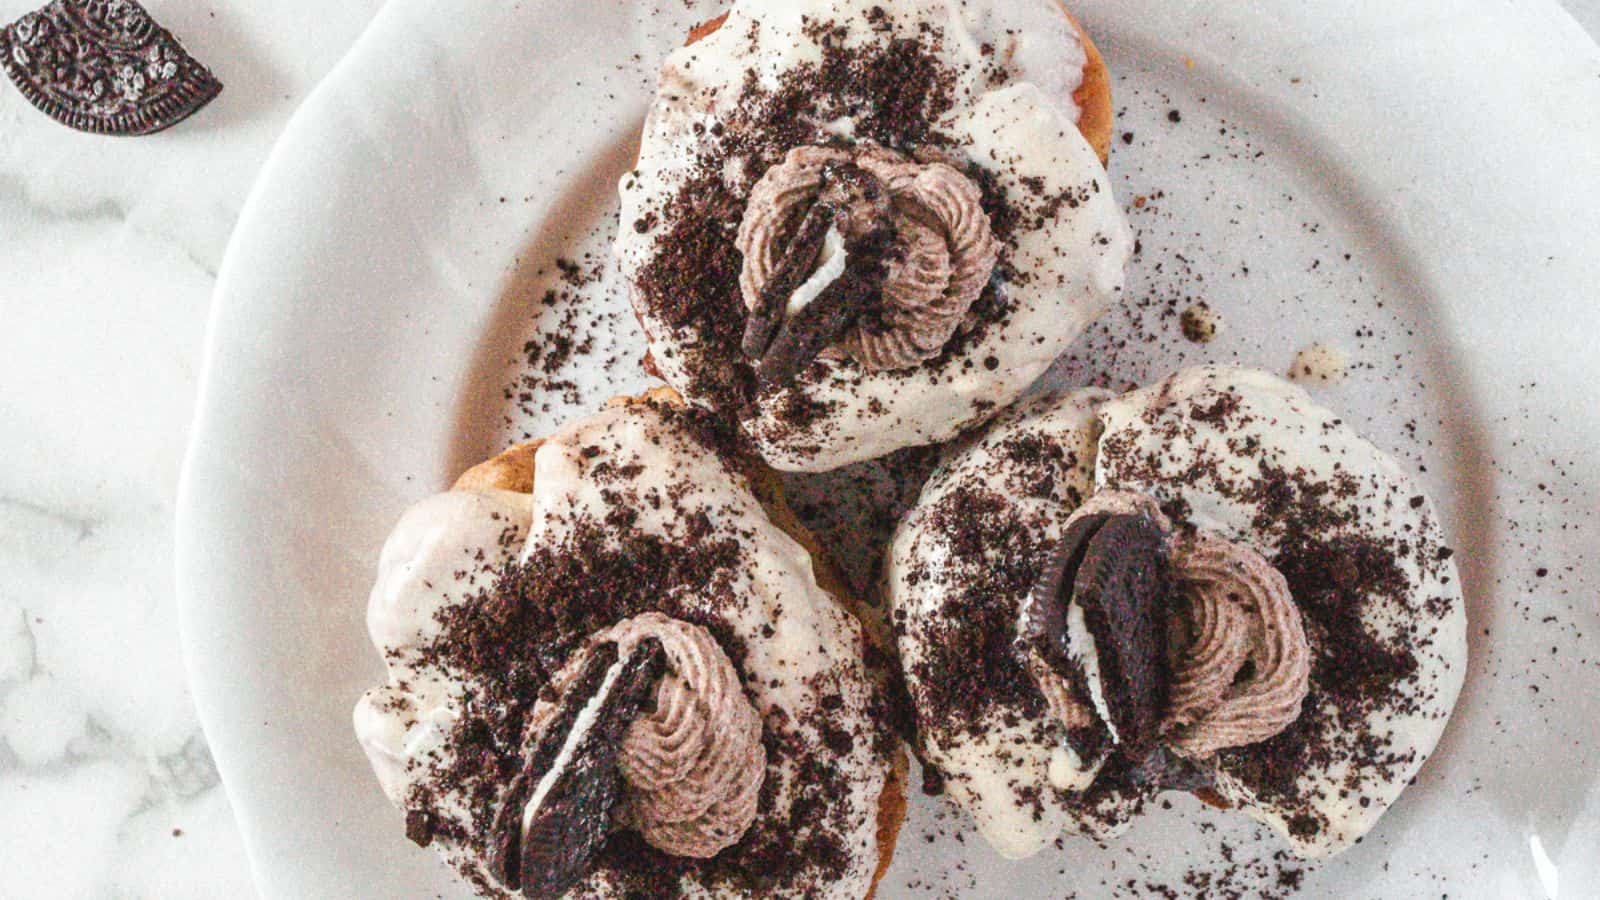 Oreo donuts on a plate with icing and oreos.